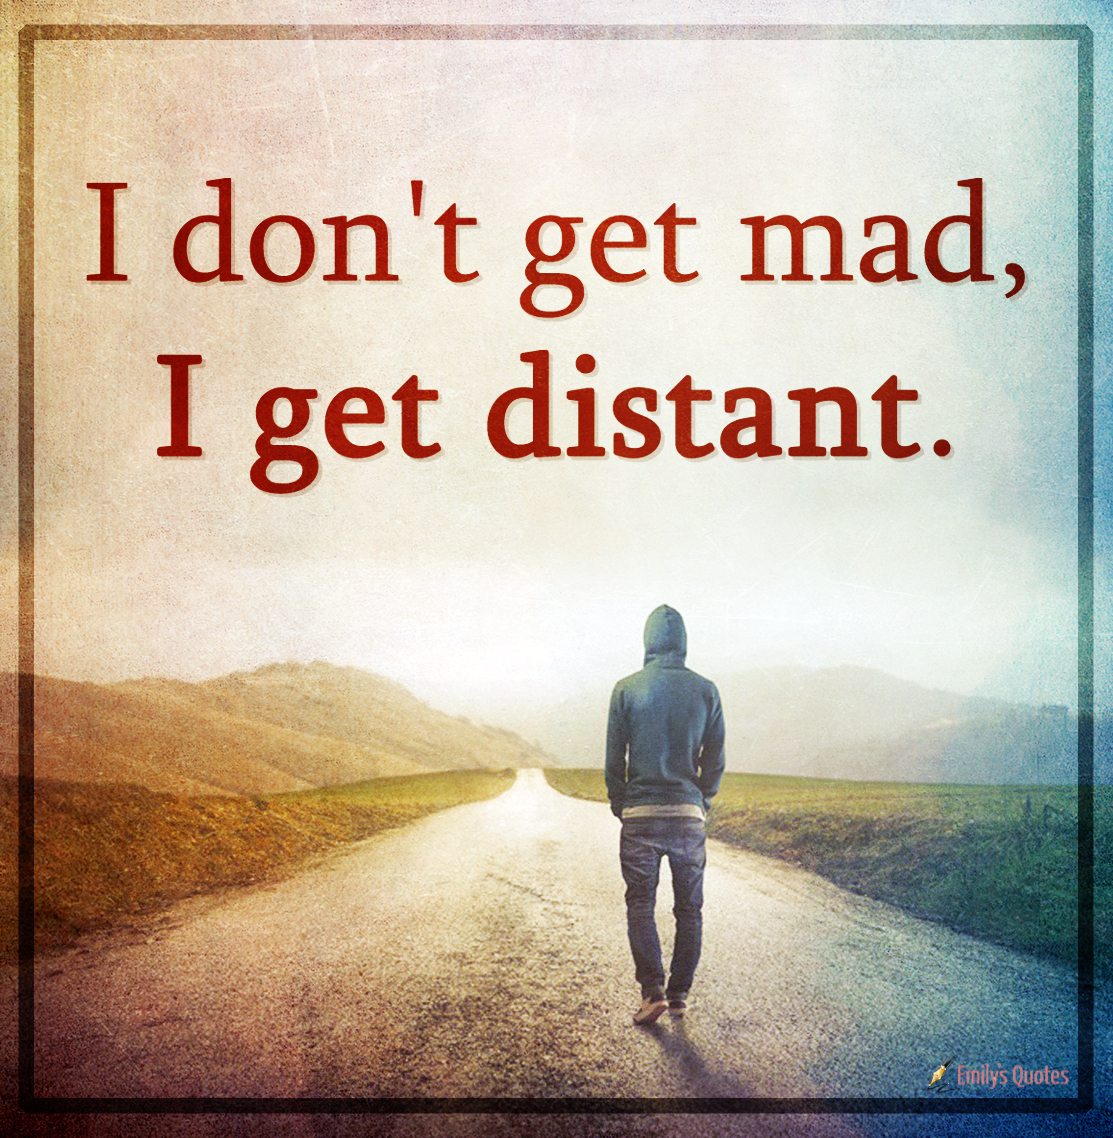 I don't get mad, I get distant | Popular inspirational quotes at ...